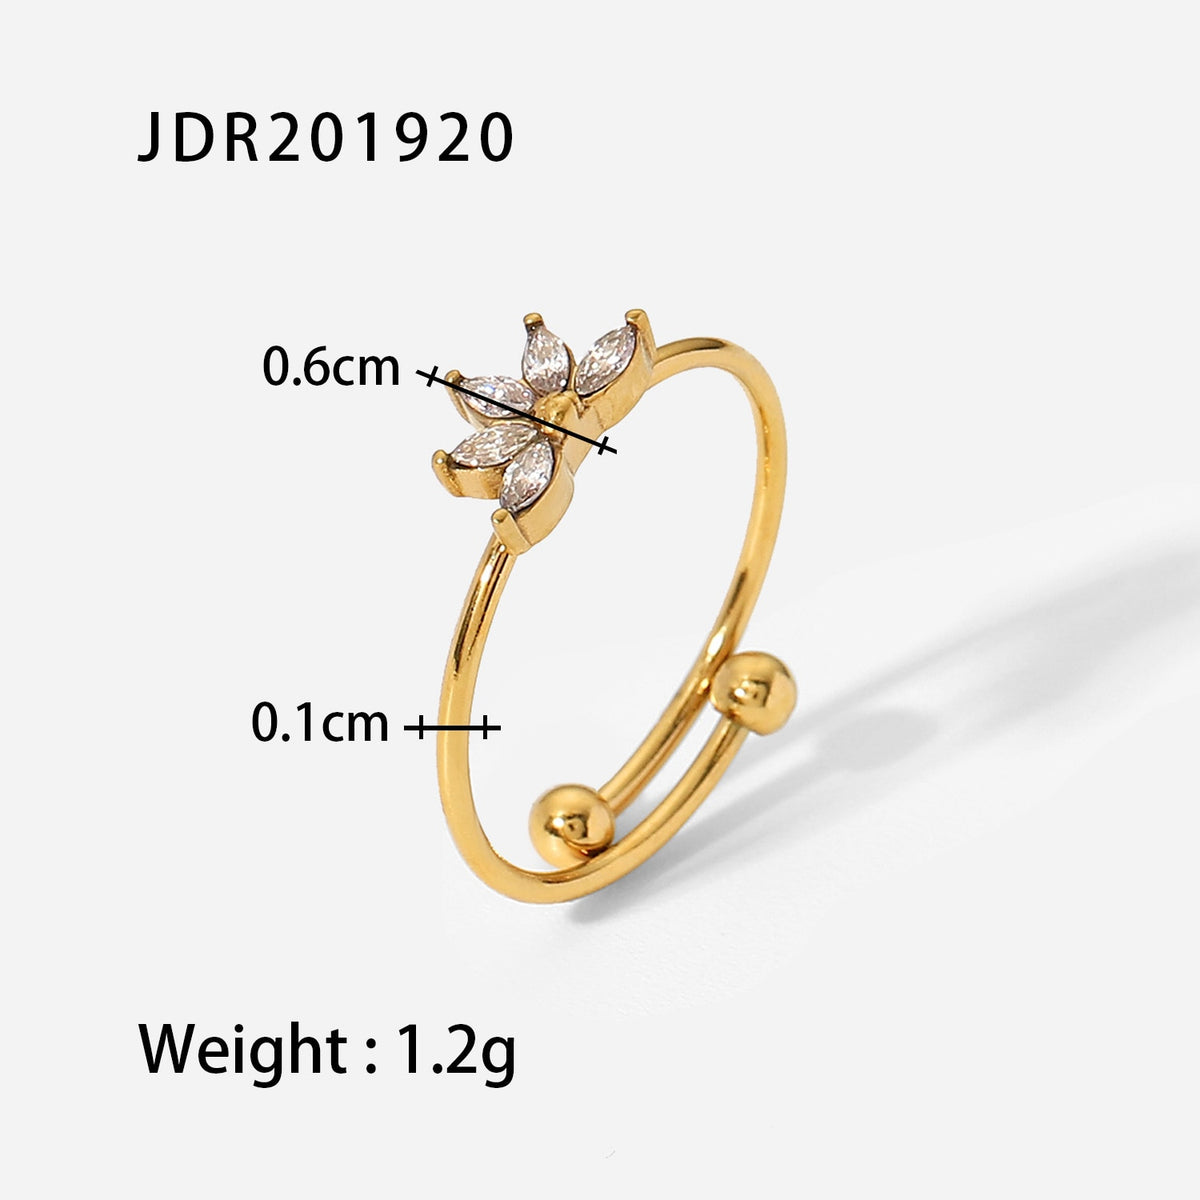 Waterproof 18K Gold Plated Flower Jewelry Gift Opening Adjustable CZ CubiC Zirconia Stainless Steel Rings for Women